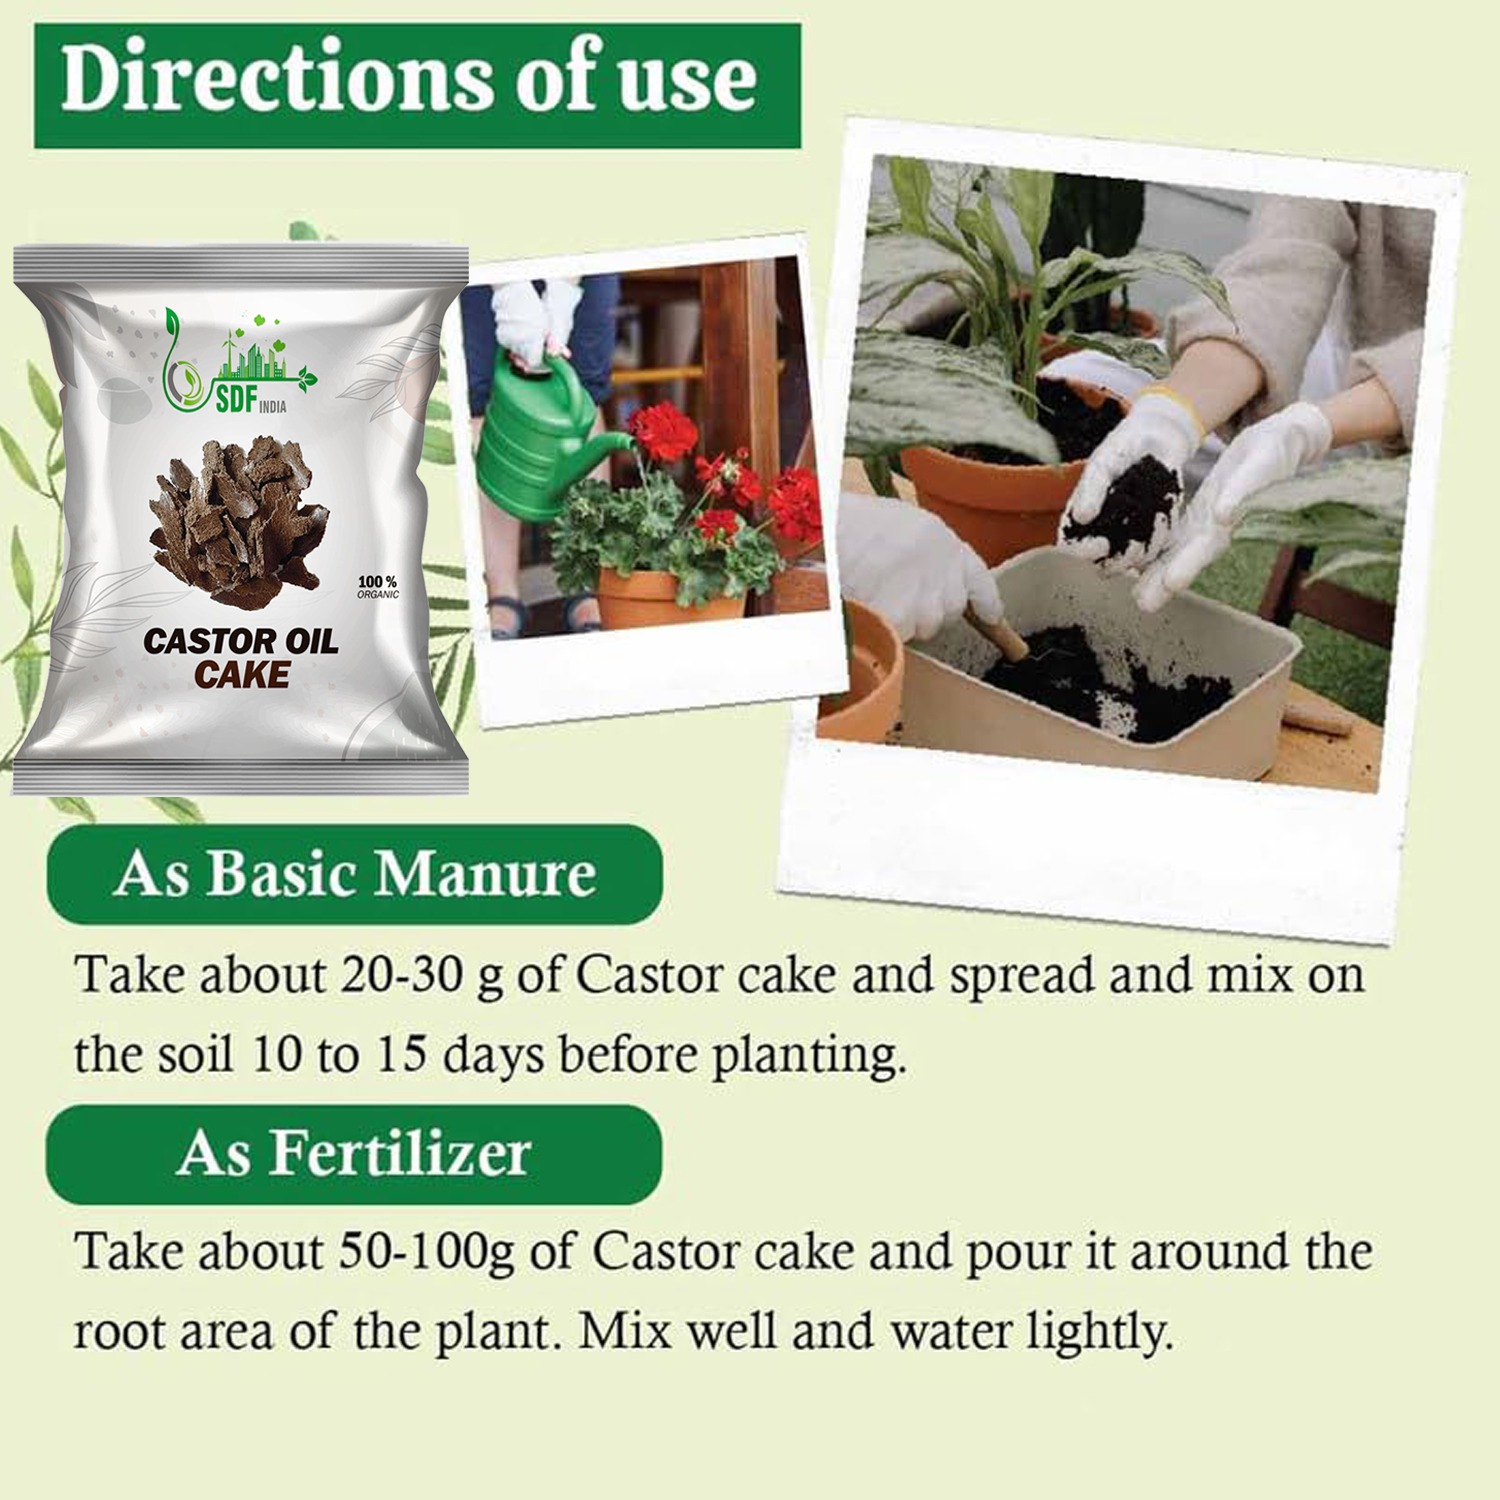 6092 SDF India Castor Oil Seed Cake Powder | 100% Natural, Organic NPK Fertilizers | Micronutrients for Plants | Home & Terrace Gardening | Boosts Plant Growth & Pest Repellent (5Kg) (SDFindia5kgCC)(6092_Castor cake_5kg)